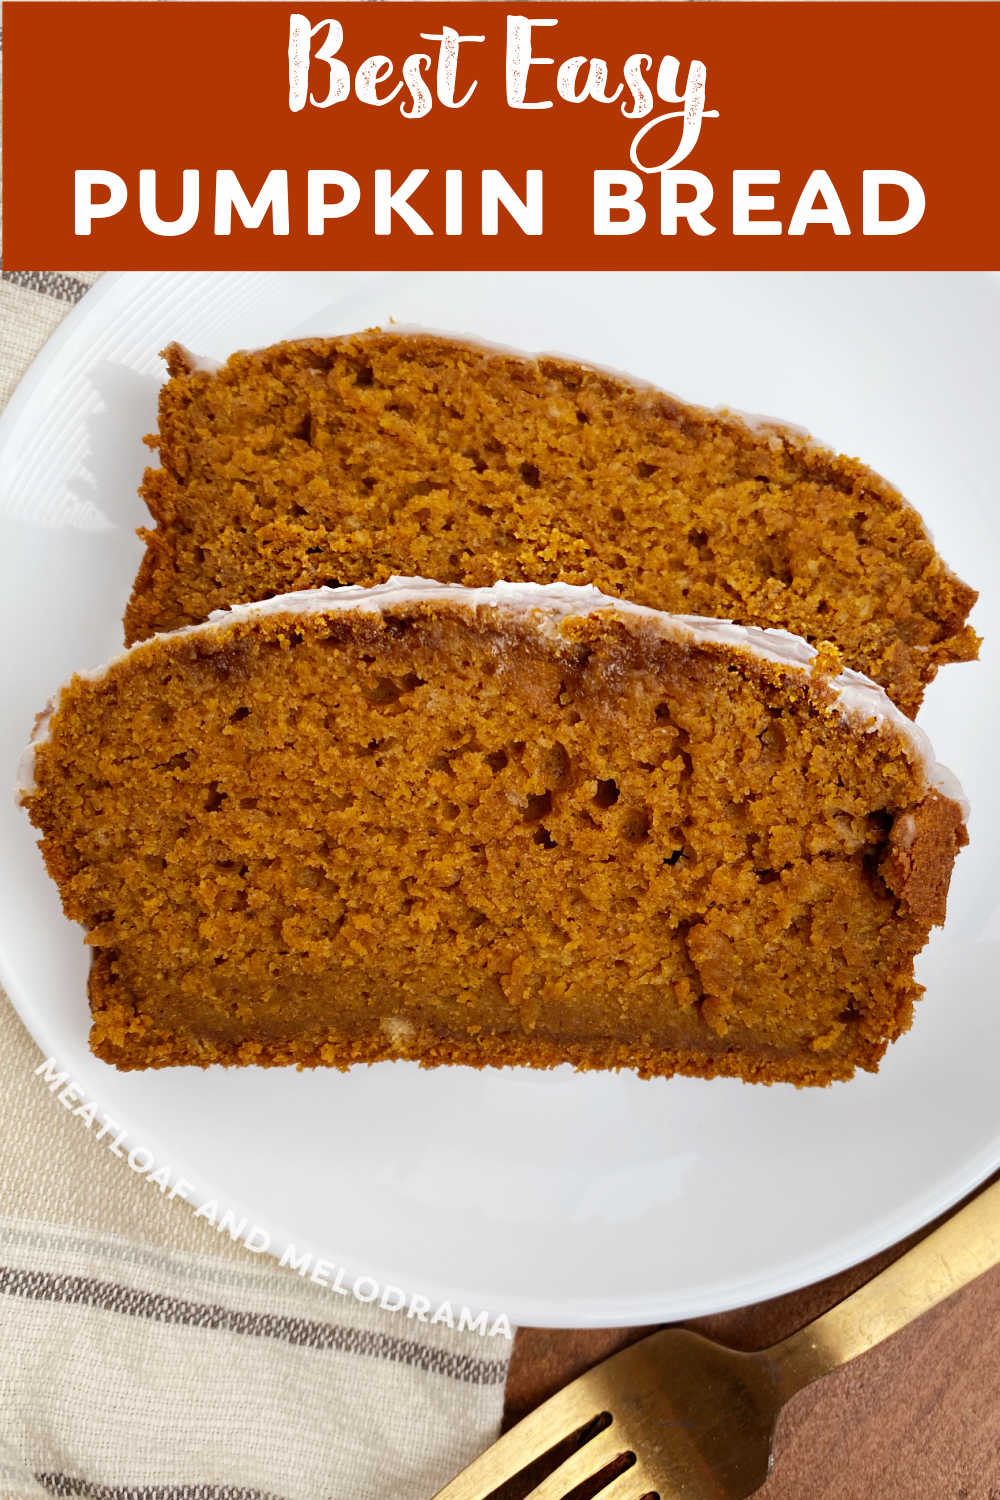 The Best Easy Pumpkin Bread Recipe made with canned pumpkin is a simple quick bread with a delicious cinnamon glaze. Perfect for fall! Enjoy this easy homemade pumpkin bread for a quick breakfast or snack with a cup of coffee or your favorite tea. via @meamel